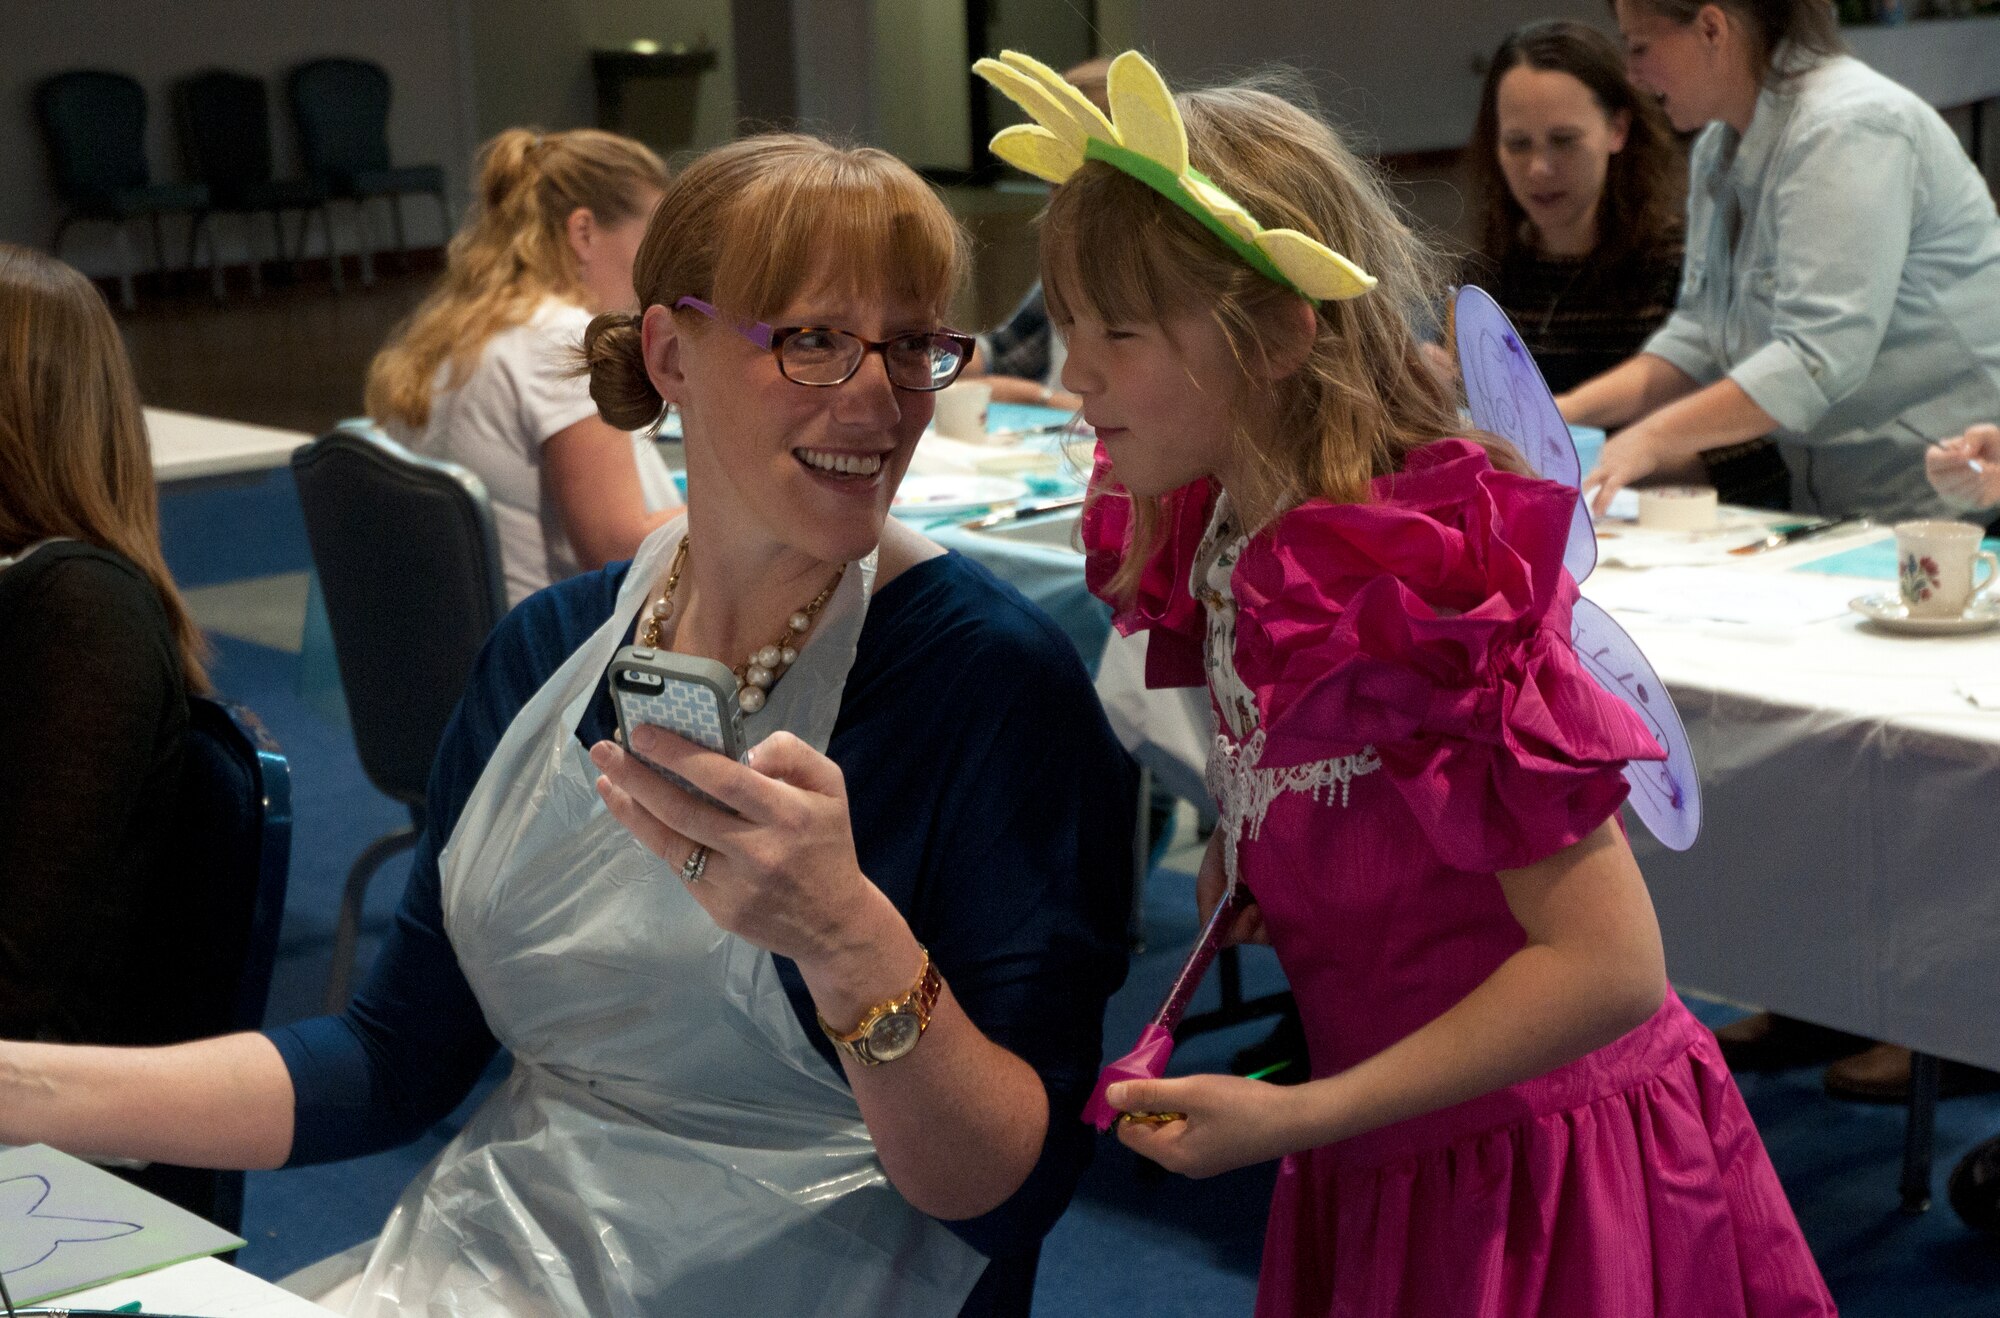 Kellie Picinni shows her daughter, Kaitlynn, 7, a photo she took of Kaitlynn in her costume May 10 during the Mommy and Me Tea and Craft event in the Fall Hall Community Center. (U.S. Air Force photo by Airman Malcolm Mayfield)